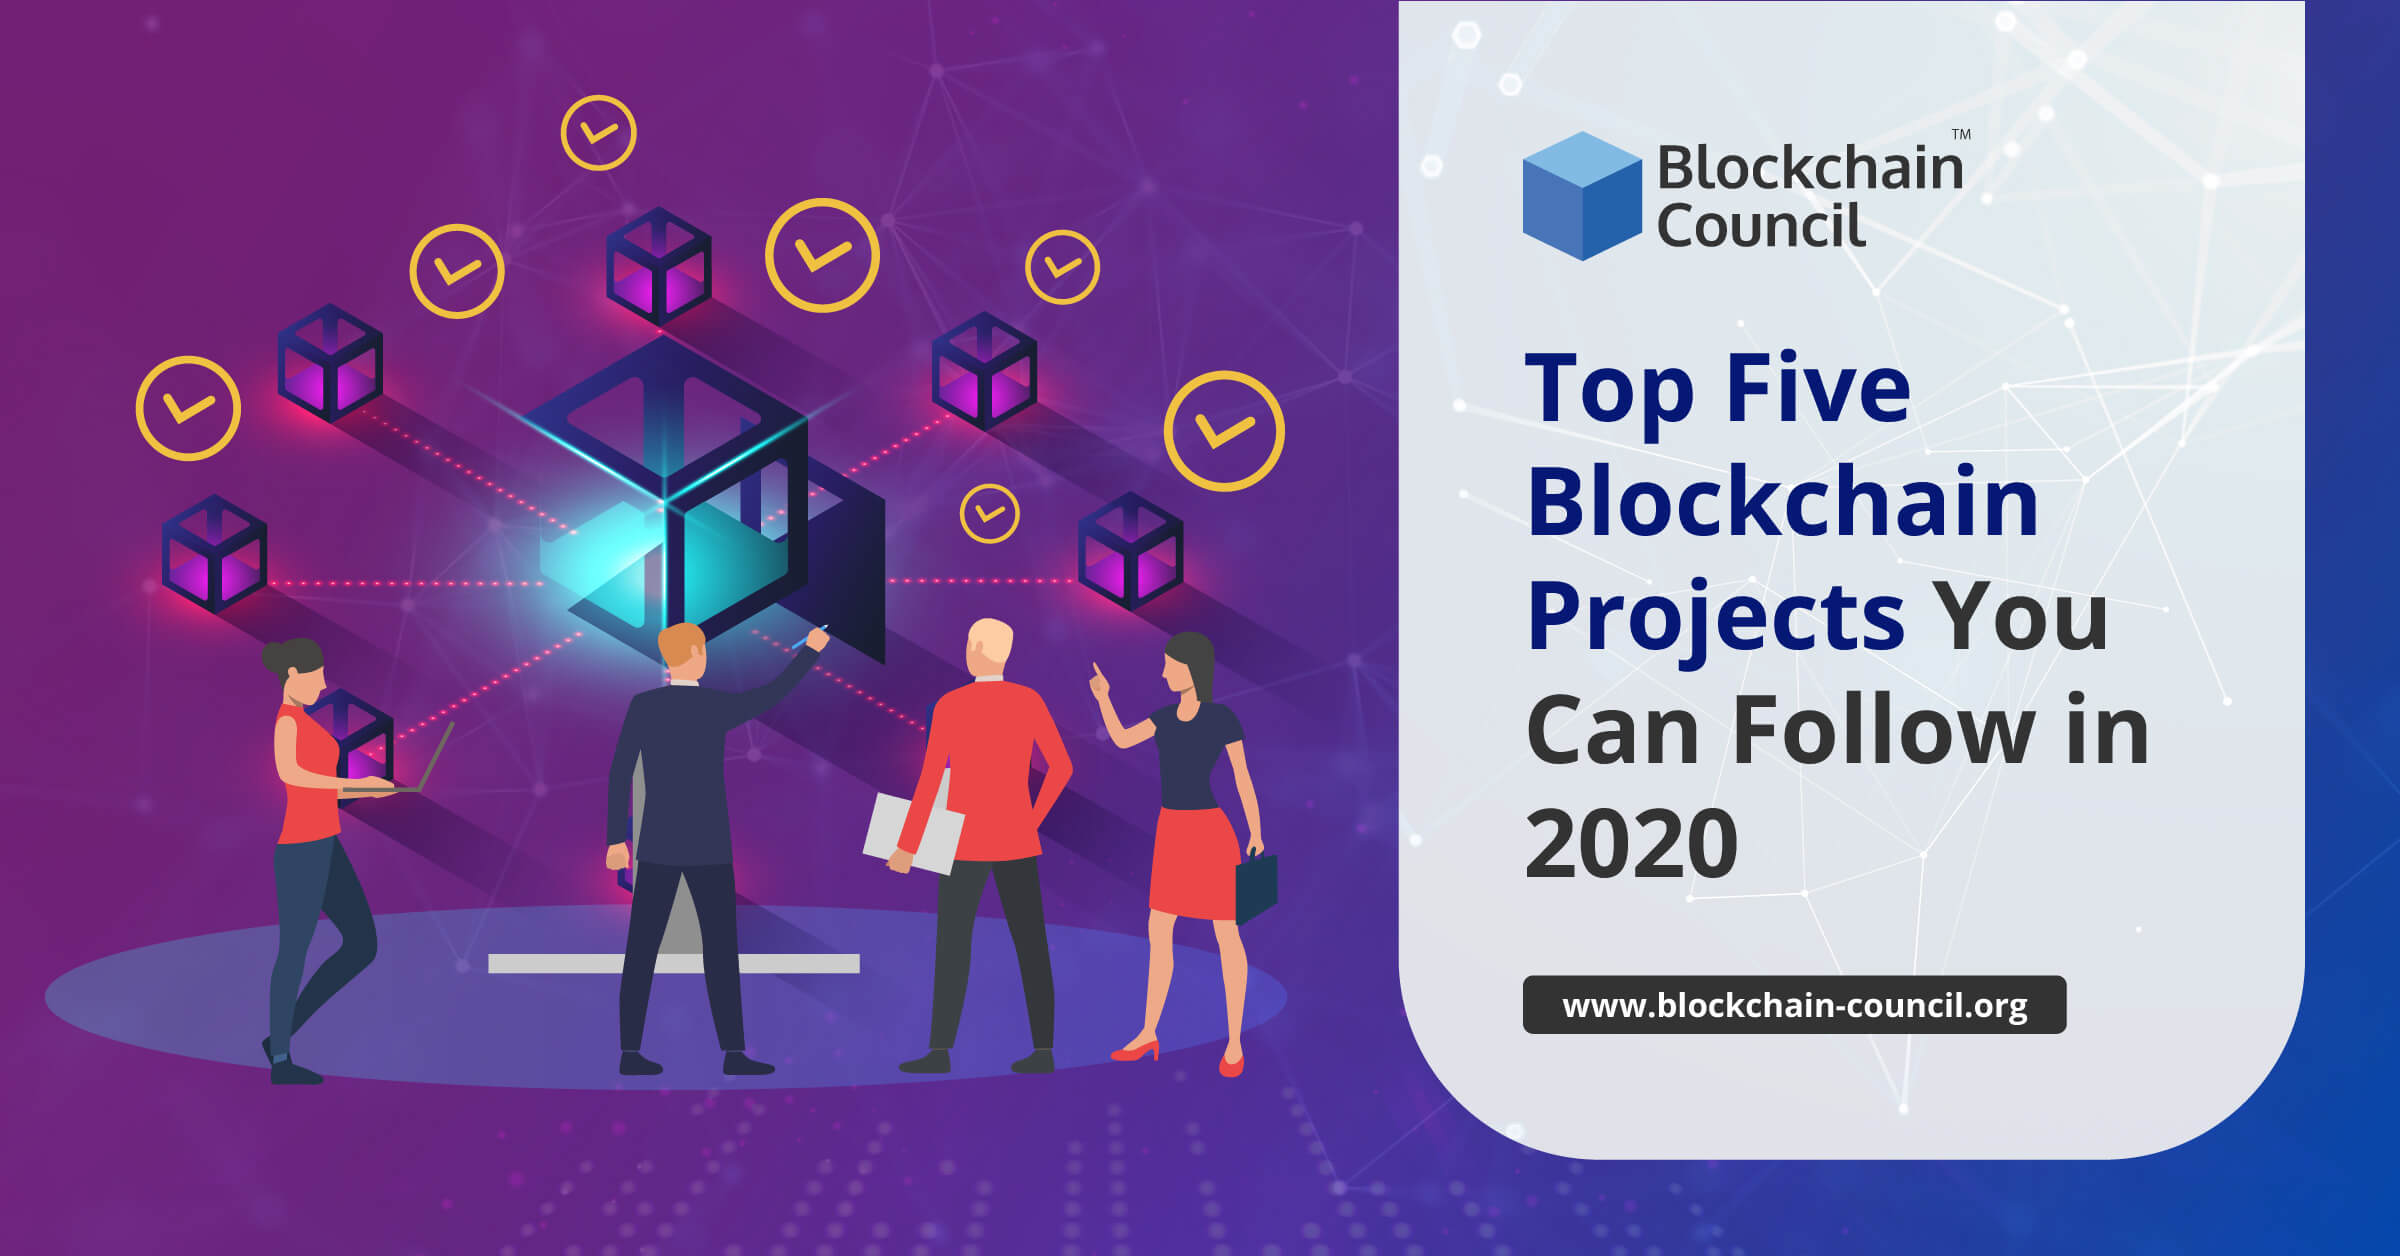 Top Five Blockchain Projects You Can Follow in 2020